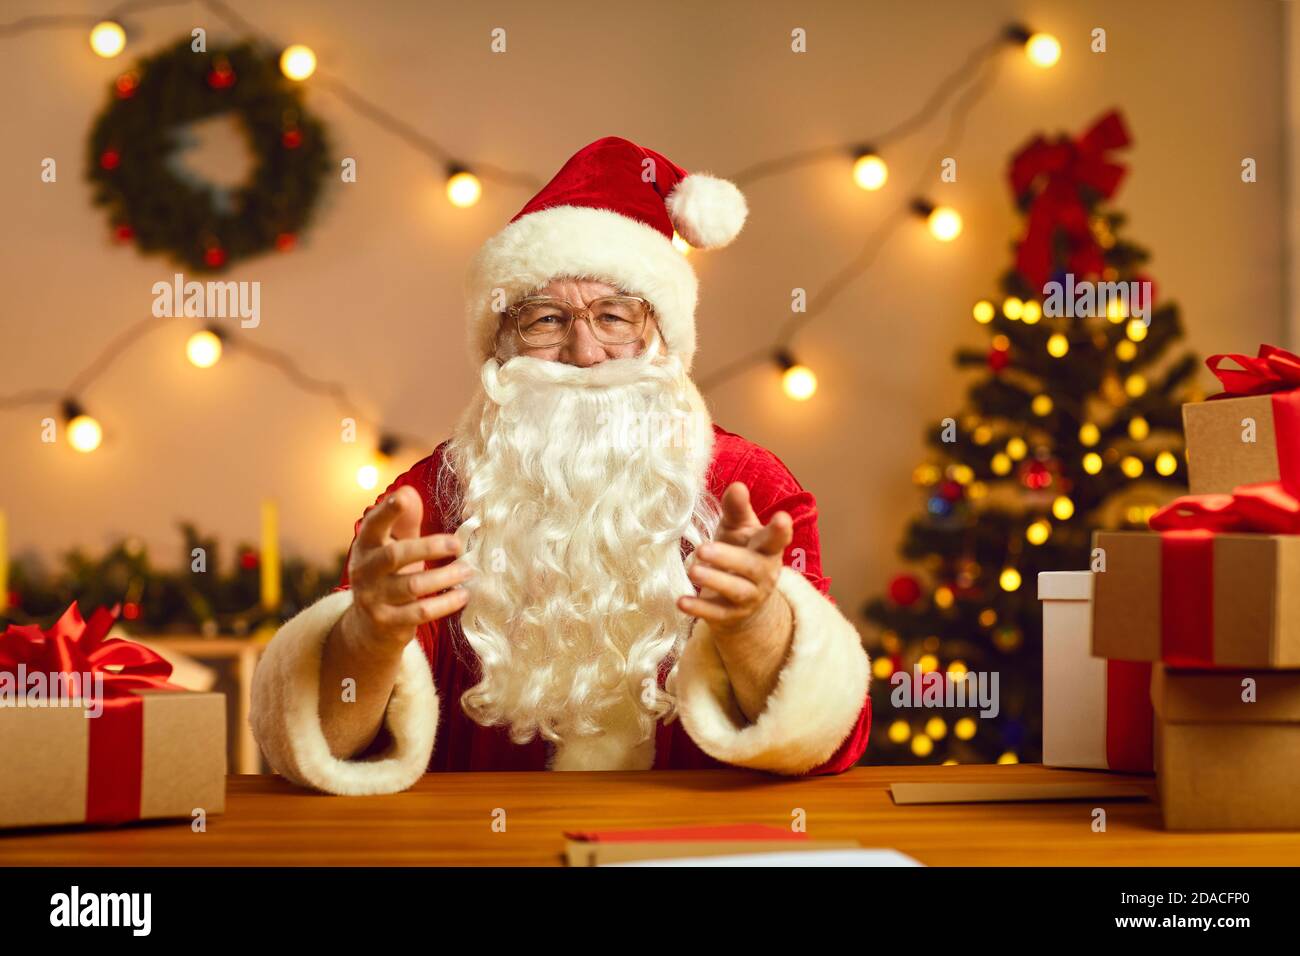 Senior Santa gesticulating during chatting and congratulating people online Stock Photo